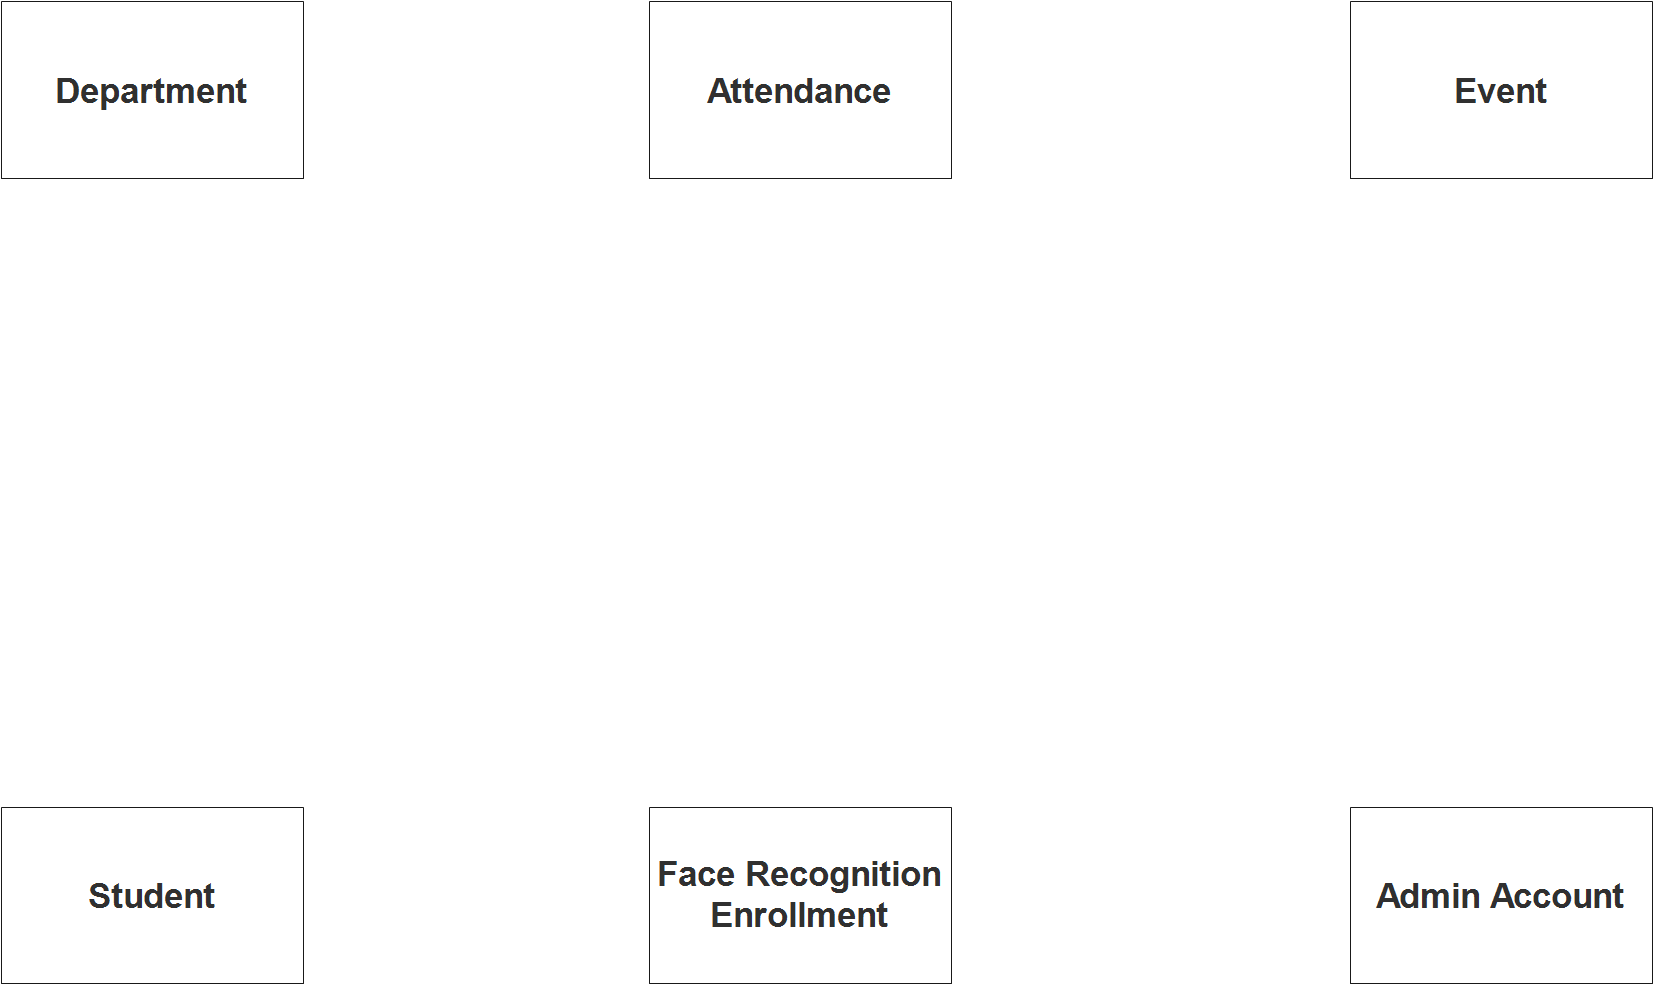 Face Recognition Attendance System ER Diagram - Step 1 Identify Entities